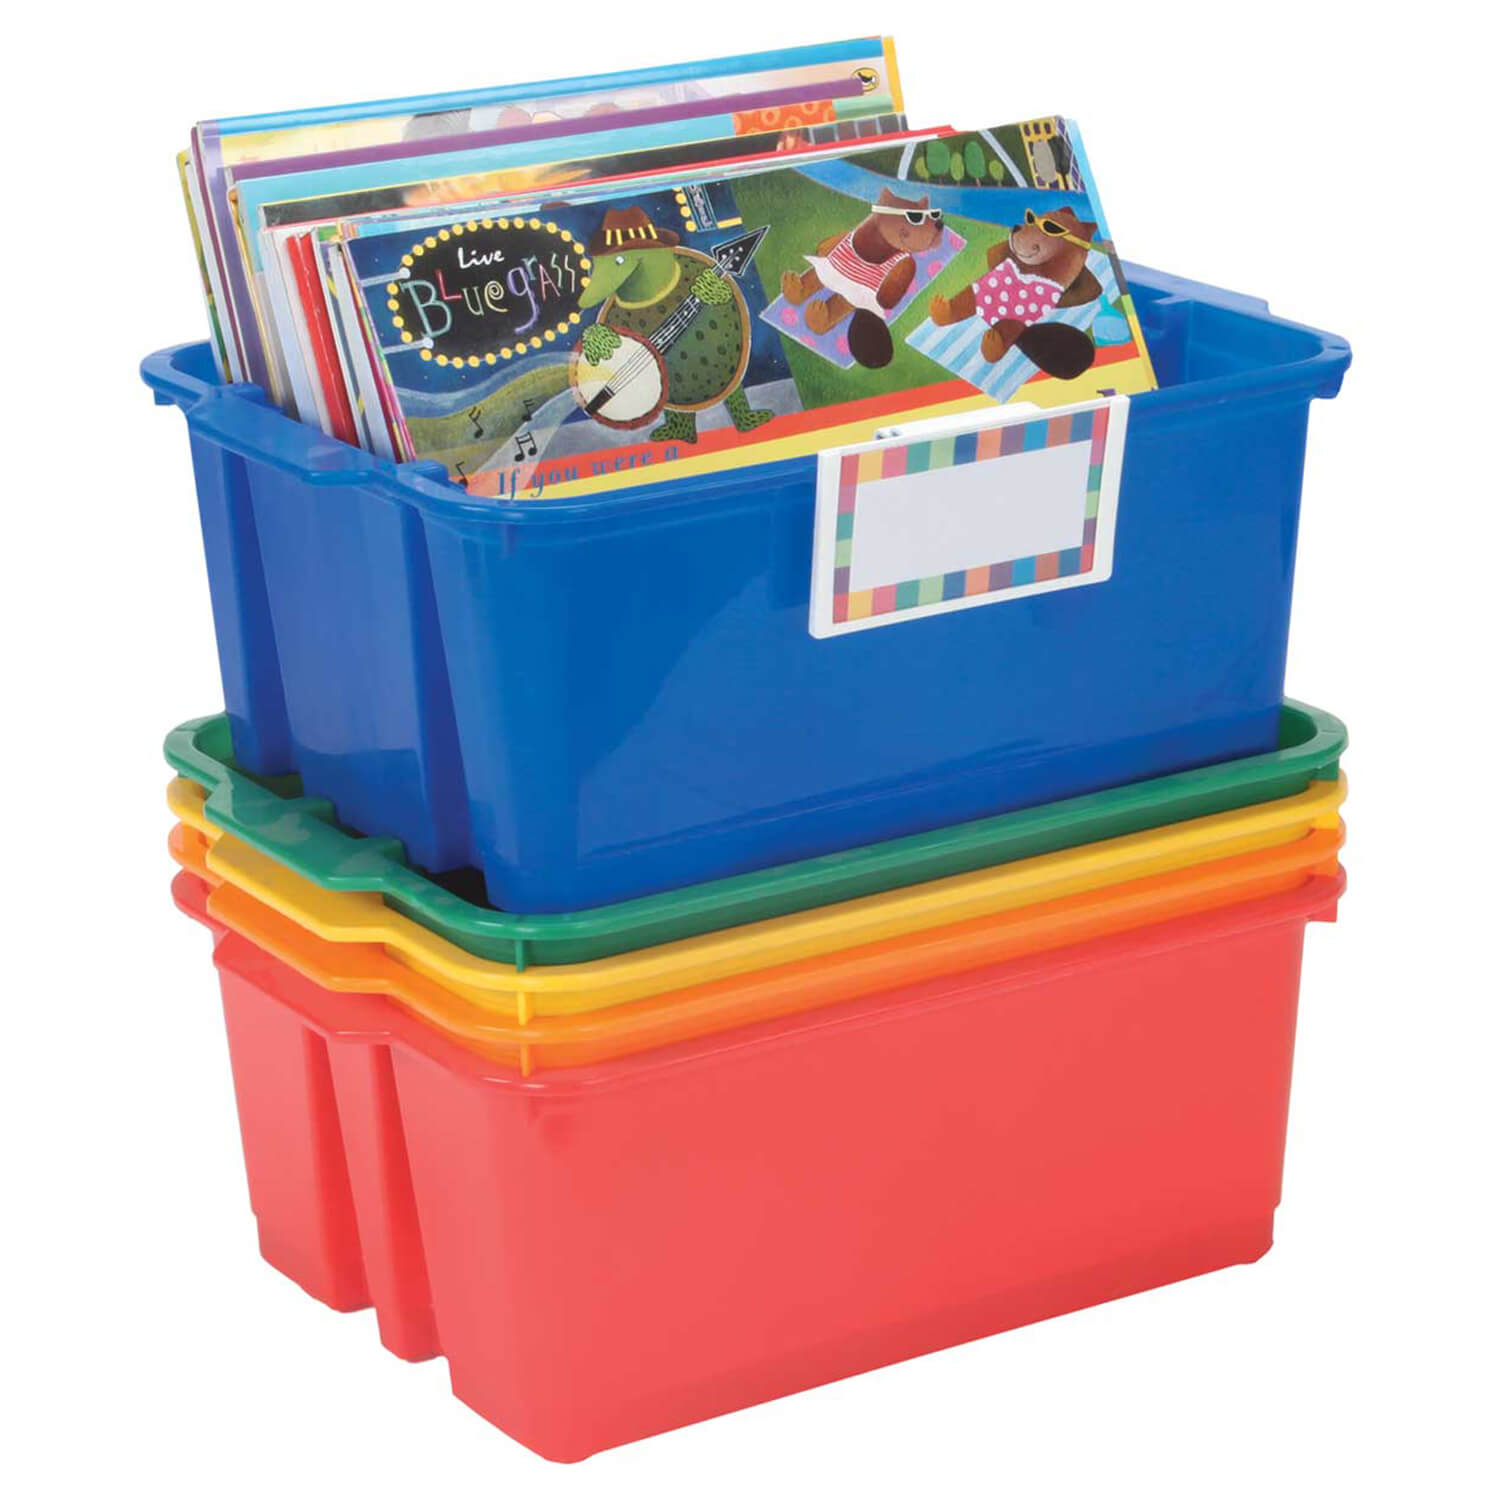 W162119625 Primary Classroom Stacking Bins With Universal Label Holders - 5 Pc